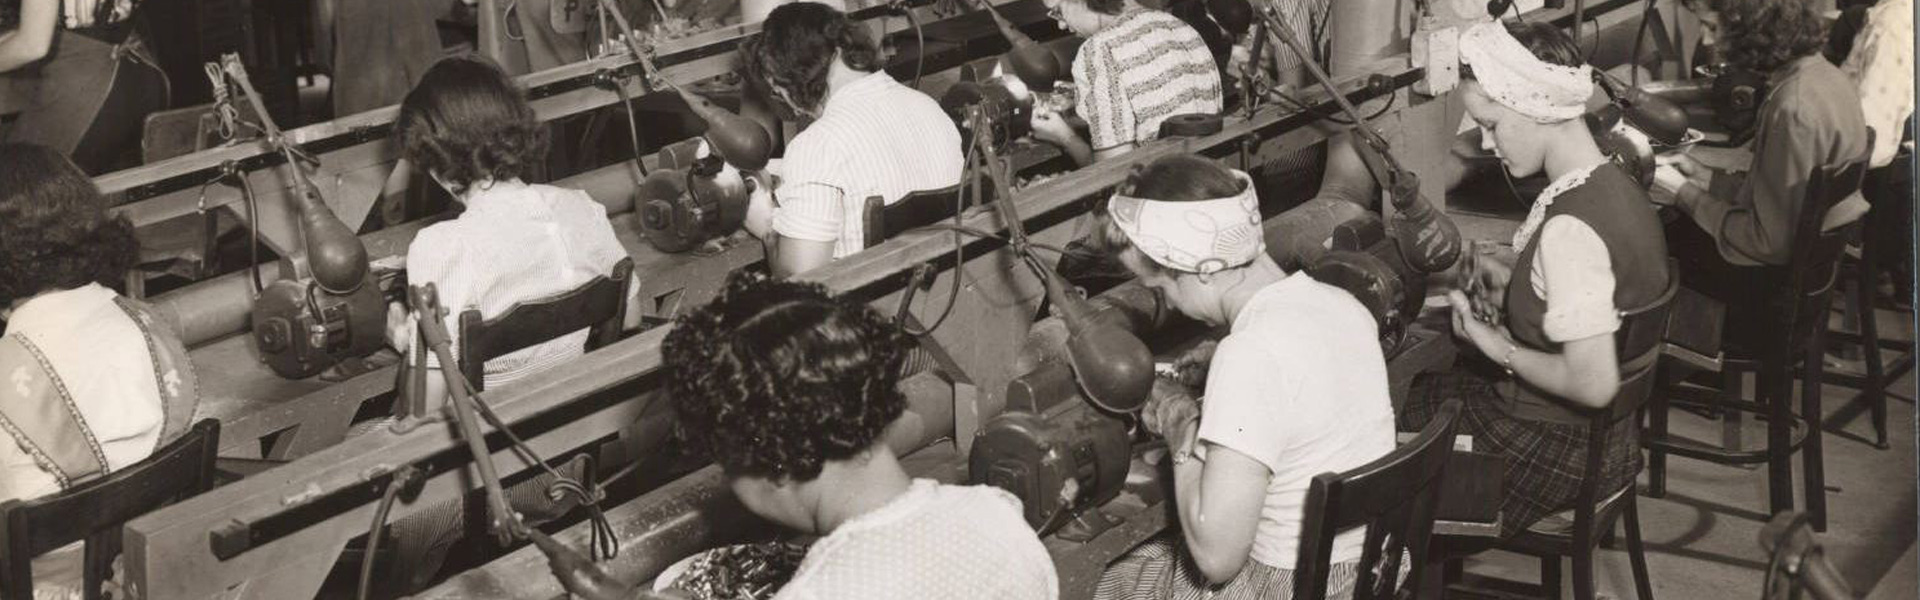 Women working in turbine factory during WWII